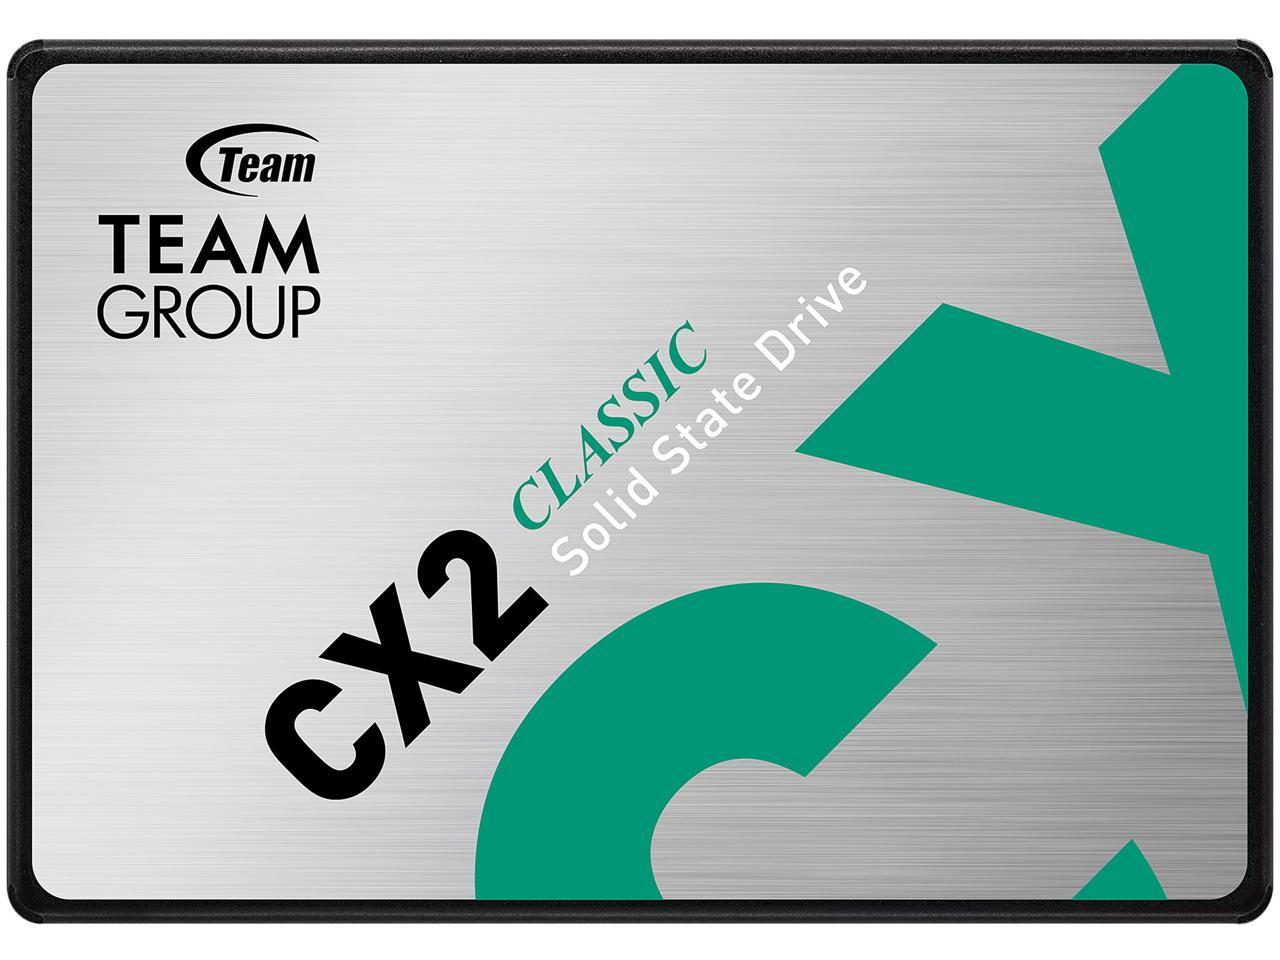 COMBO: Team Group CX2 2.5" 1TB SATA III 3D NAND Internal SSD and Team 32GB microSDHC UHS-I/U1 Class 10 Memory Card with Adapter $71.99